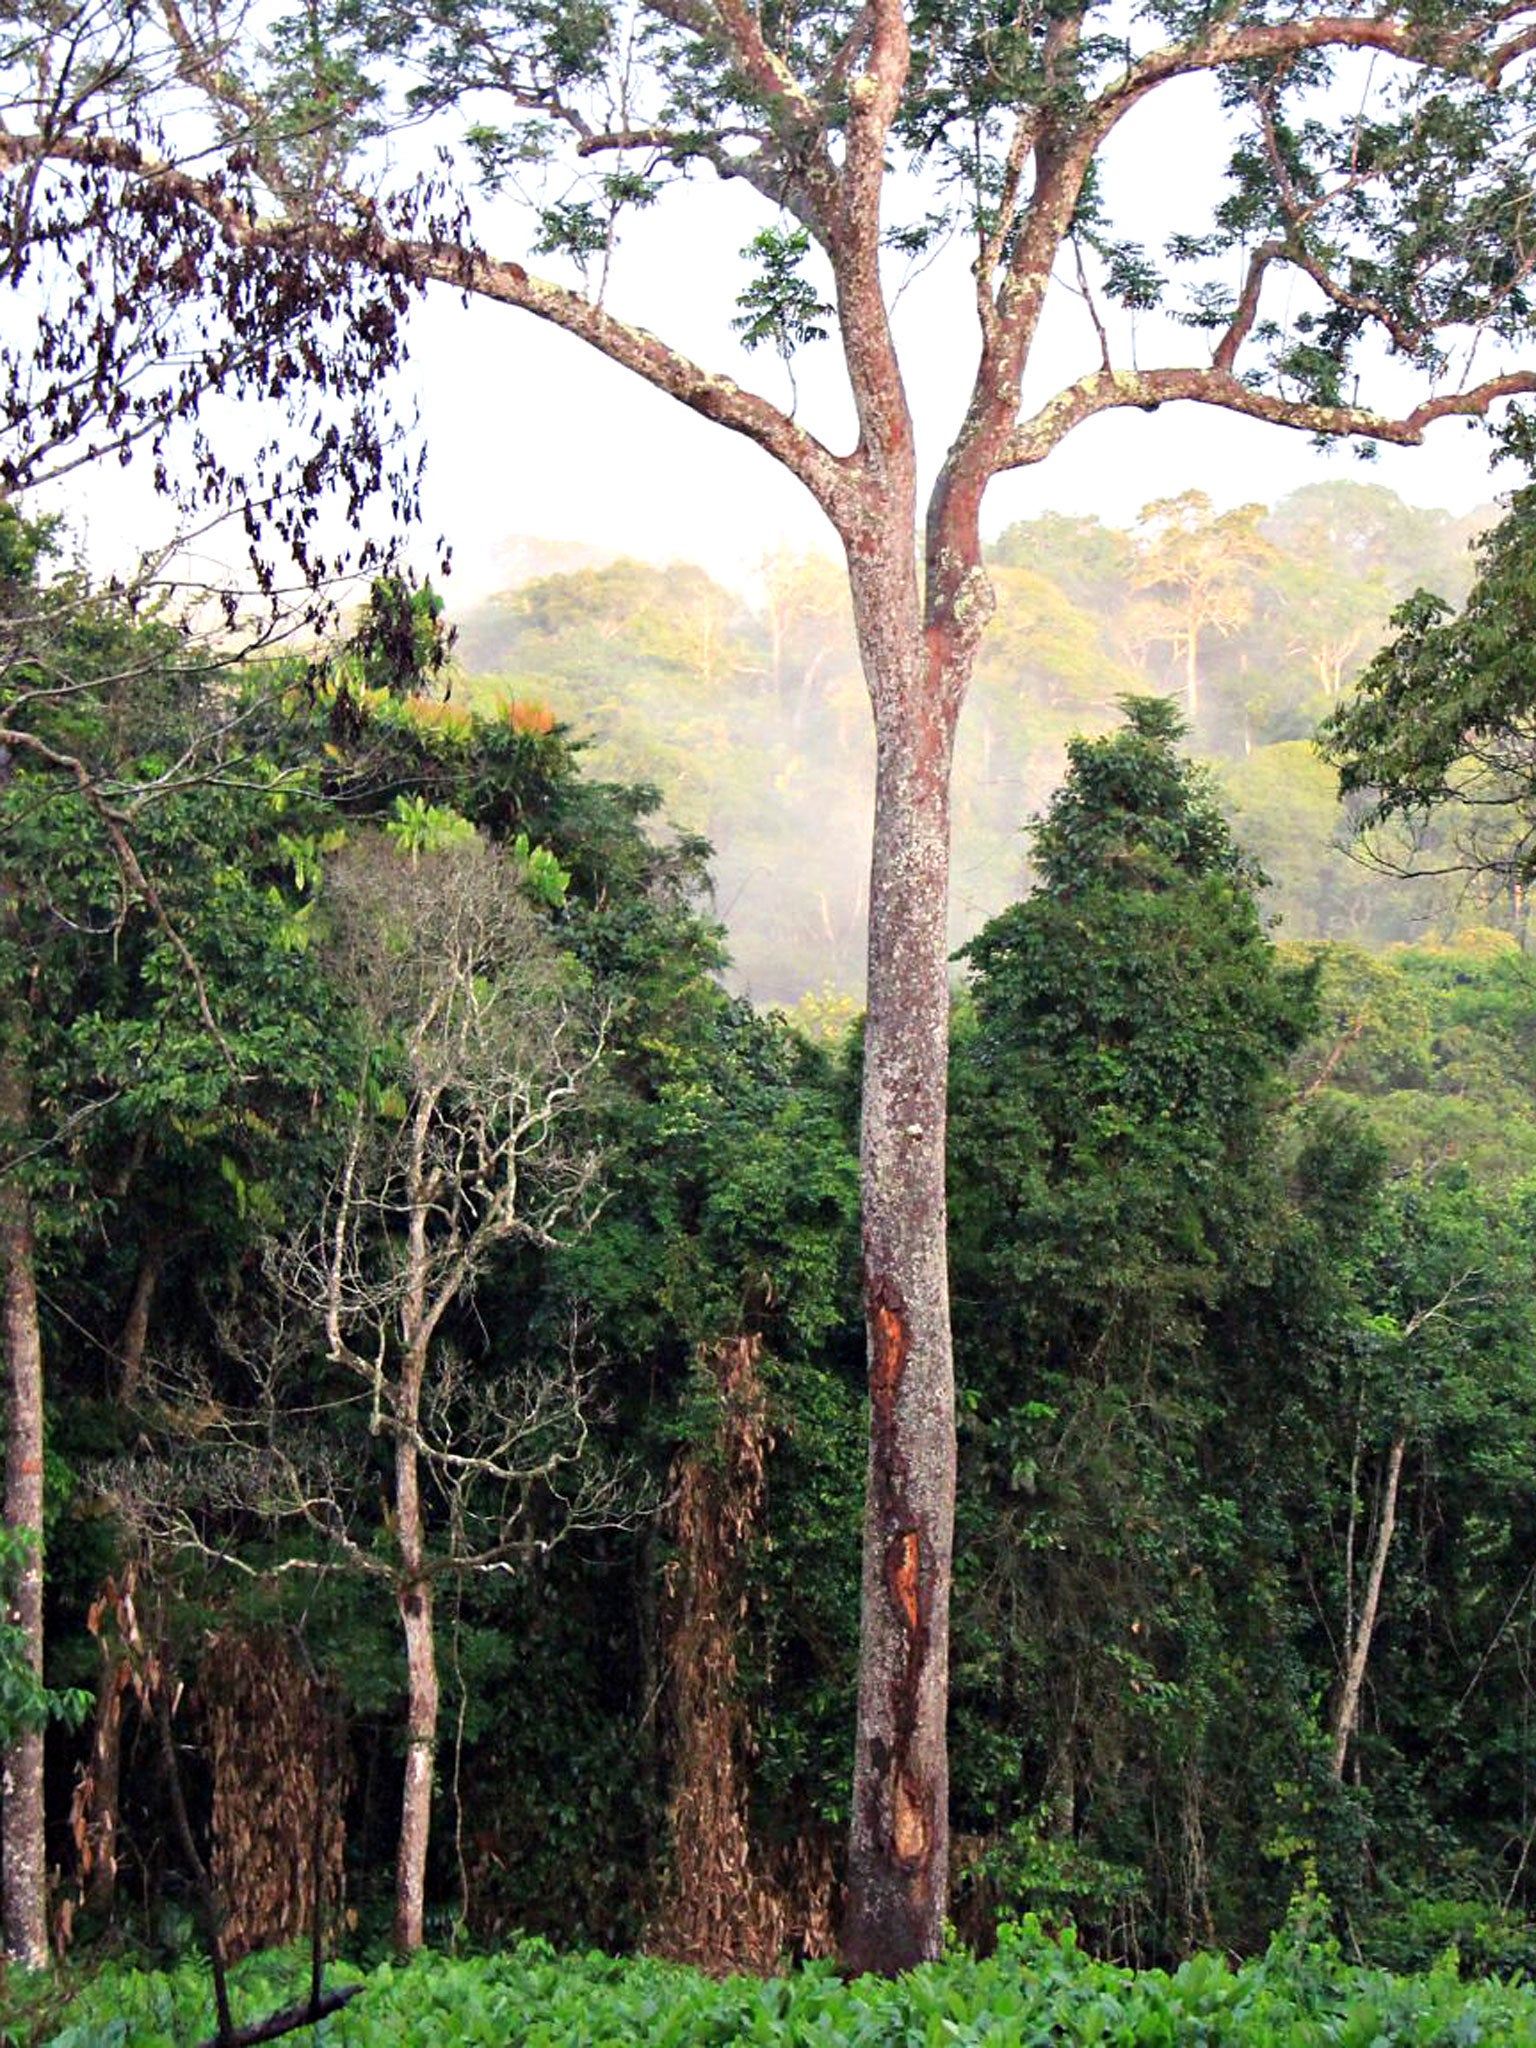 Monkeying around: rainforest in the Congo